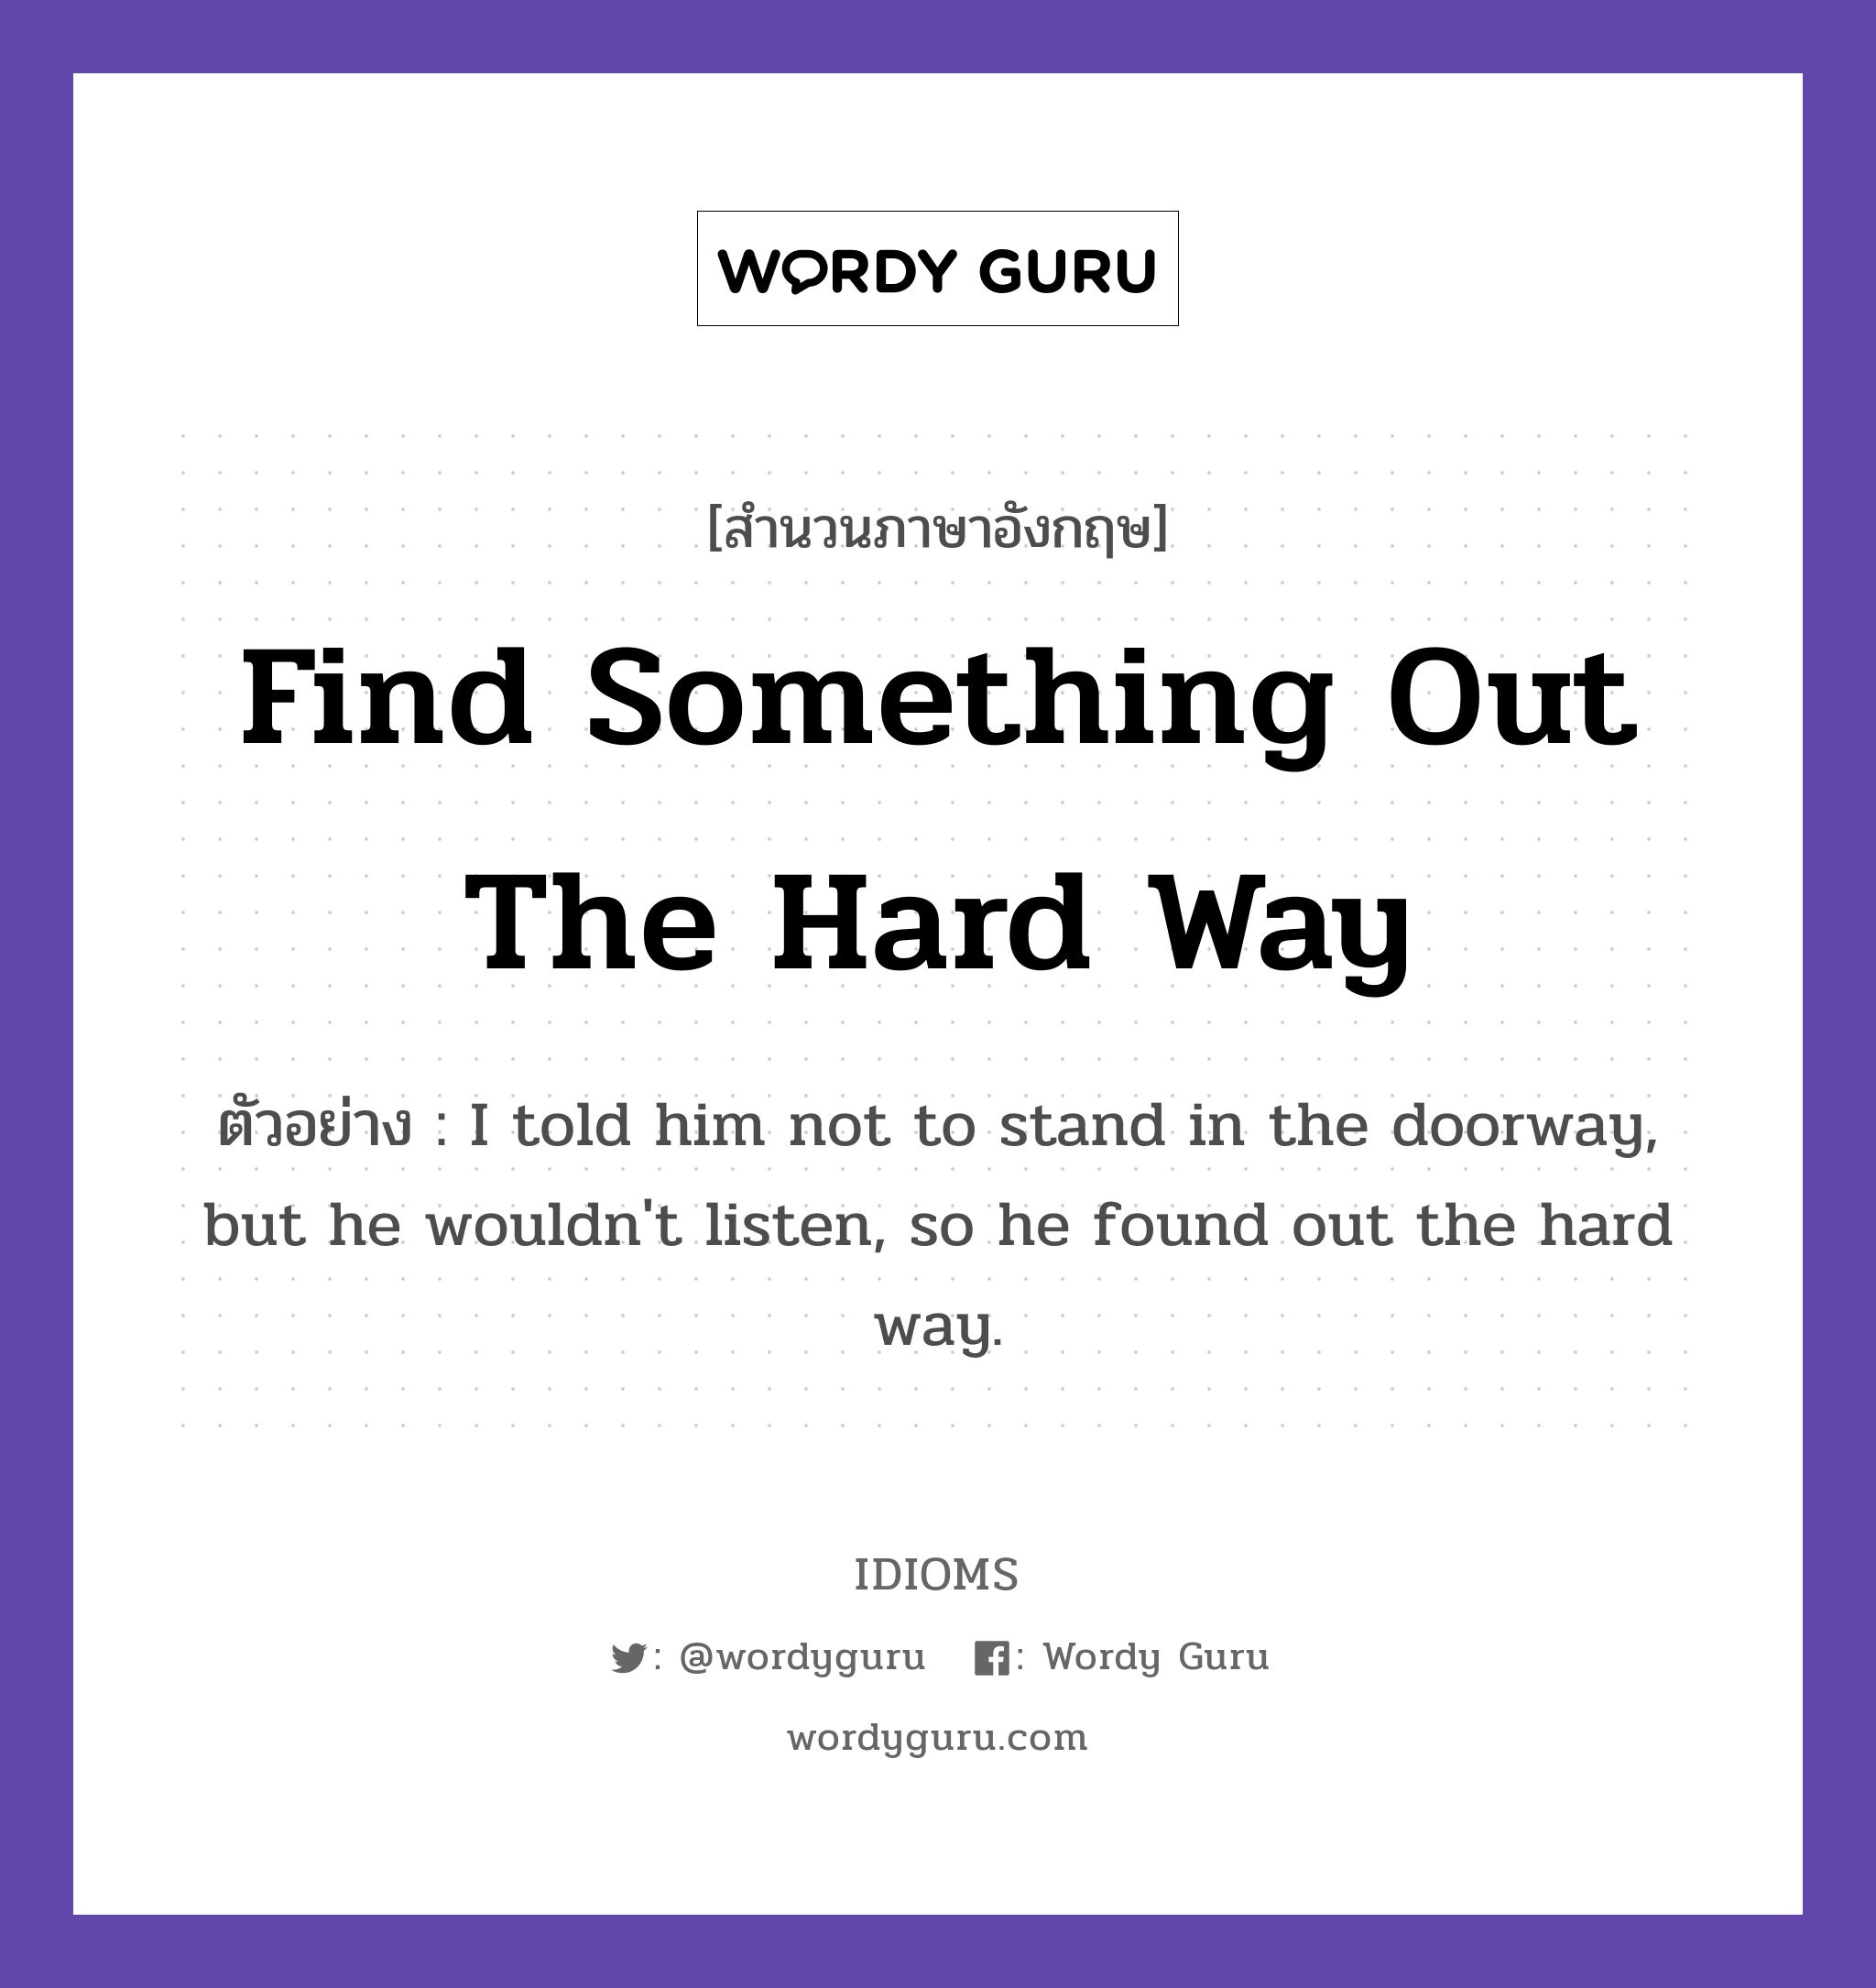 Find Something Out The Hard Way แปลว่า?, สำนวนภาษาอังกฤษ Find Something Out The Hard Way ตัวอย่าง I told him not to stand in the doorway, but he wouldn't listen, so he found out the hard way.